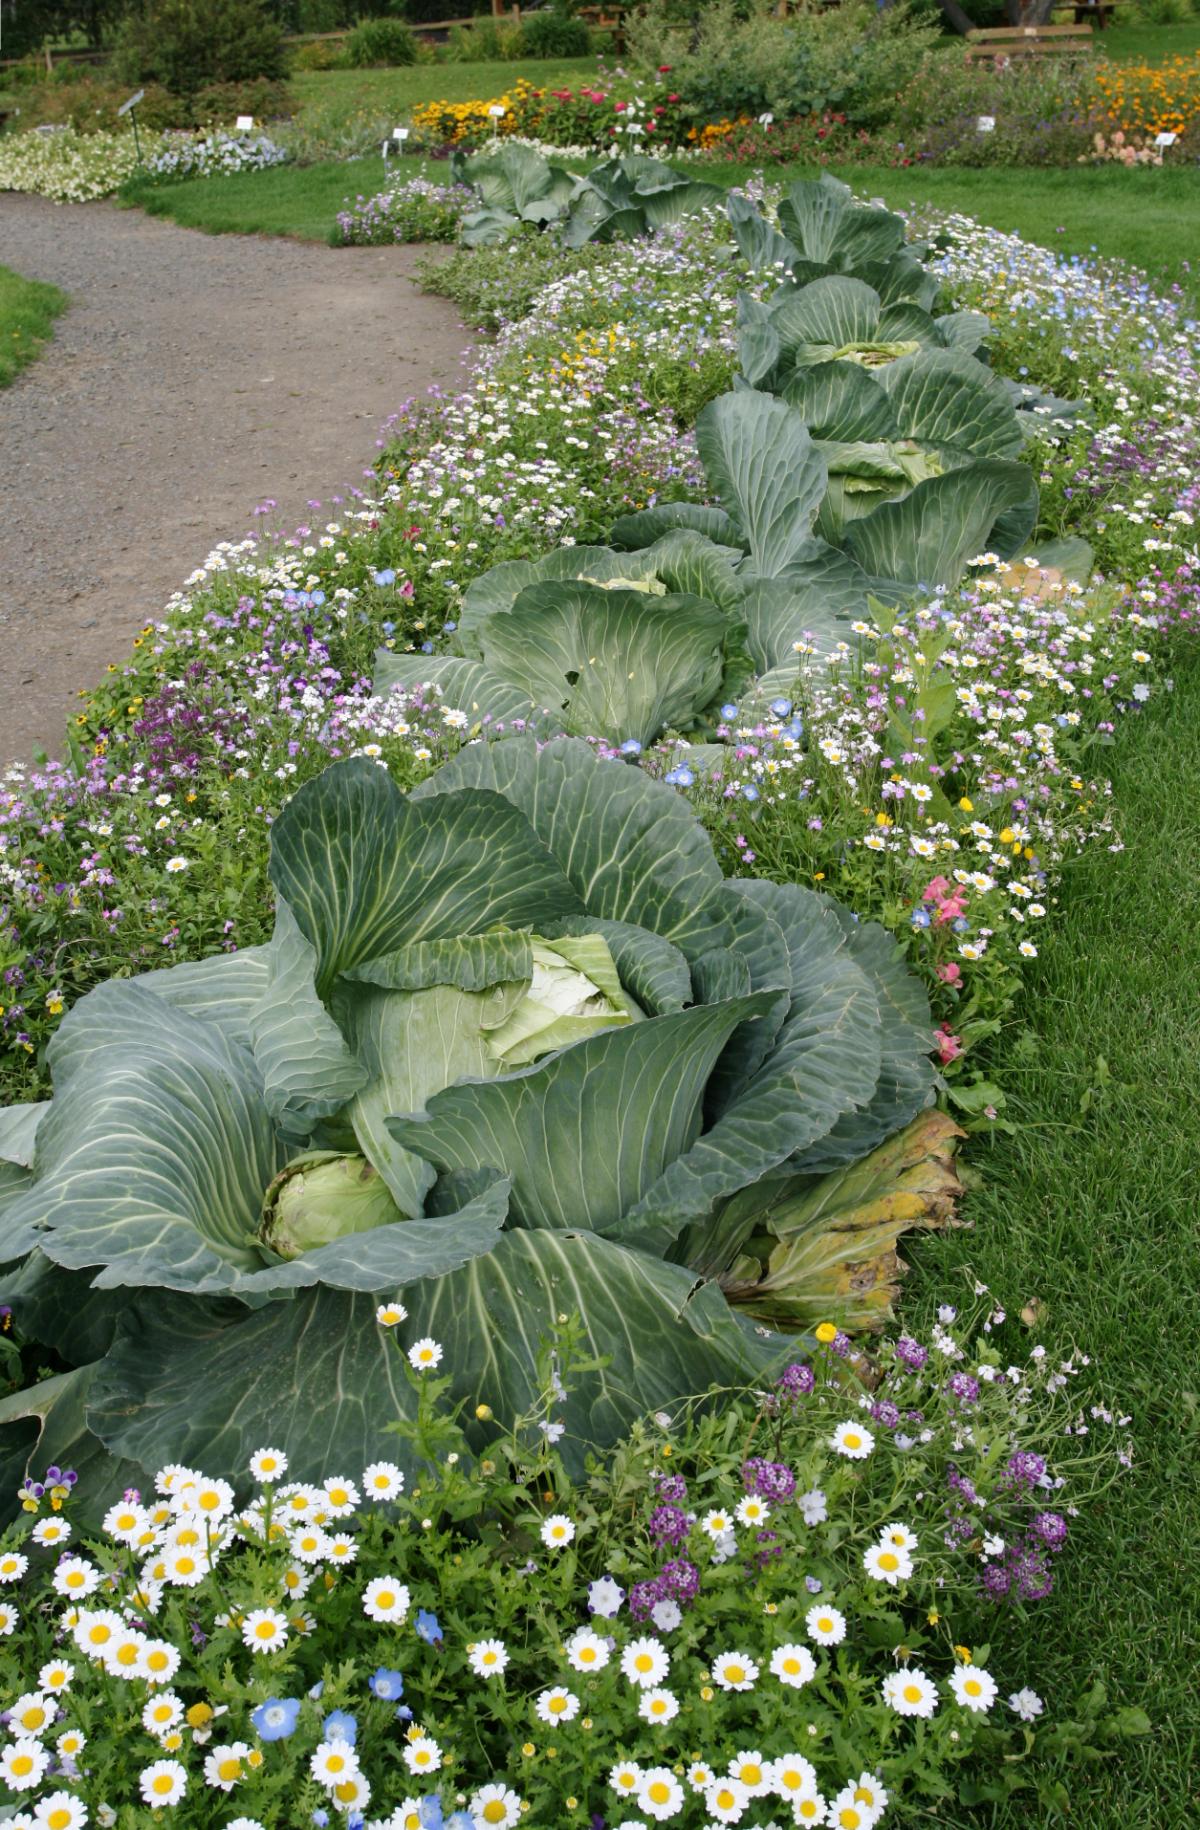 Cabbage mixed with flowers and herbs in an edible landscape